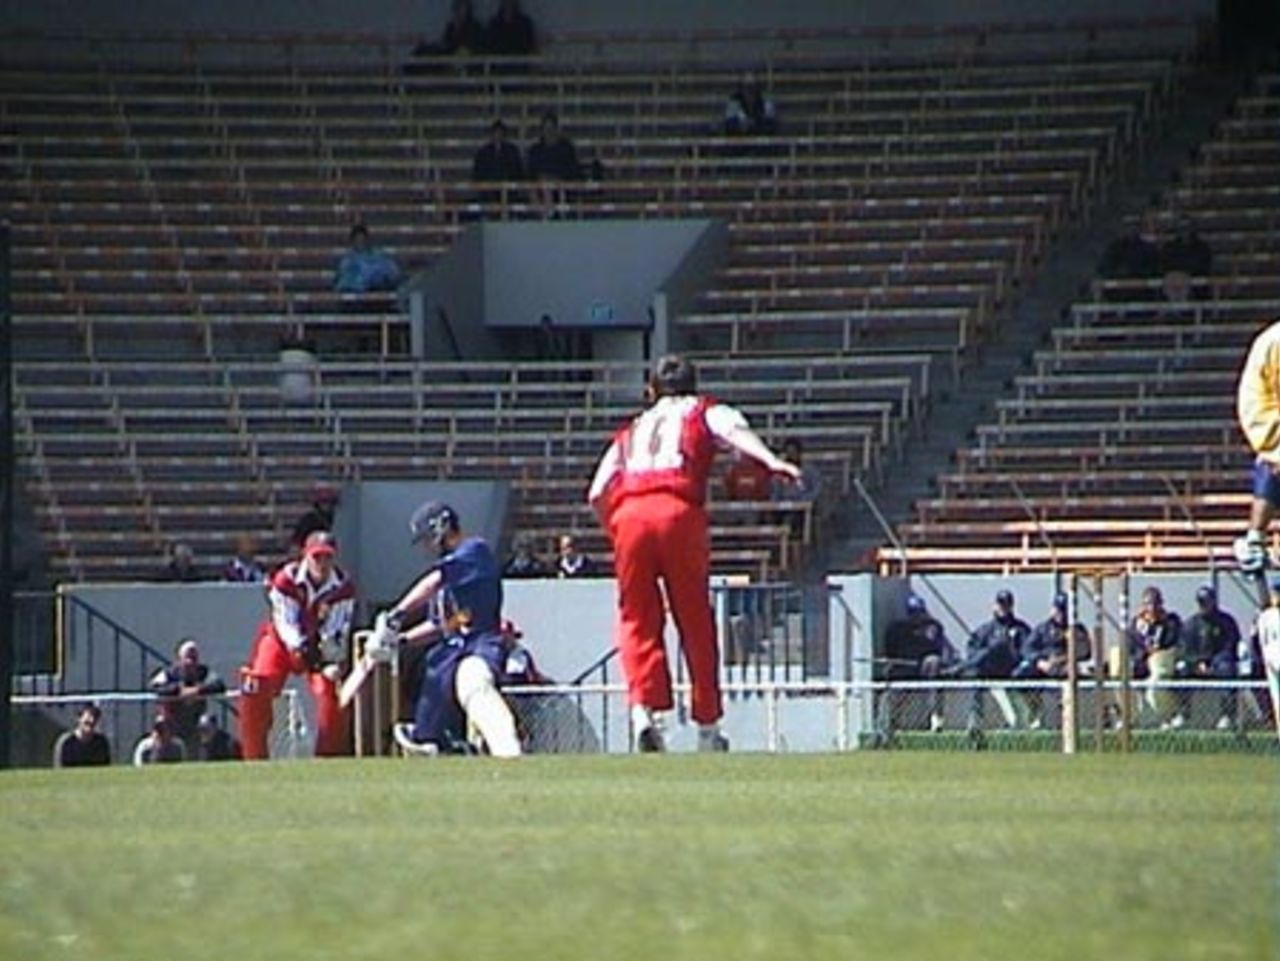 Otago batsman Chris Gaffaney attempts to run a ball from Canterbury left arm orthodox spinner Carl Anderson down to third man, Shell Cup: Canterbury v Otago at Jade Stadium, Christchurch, 16 January 2001